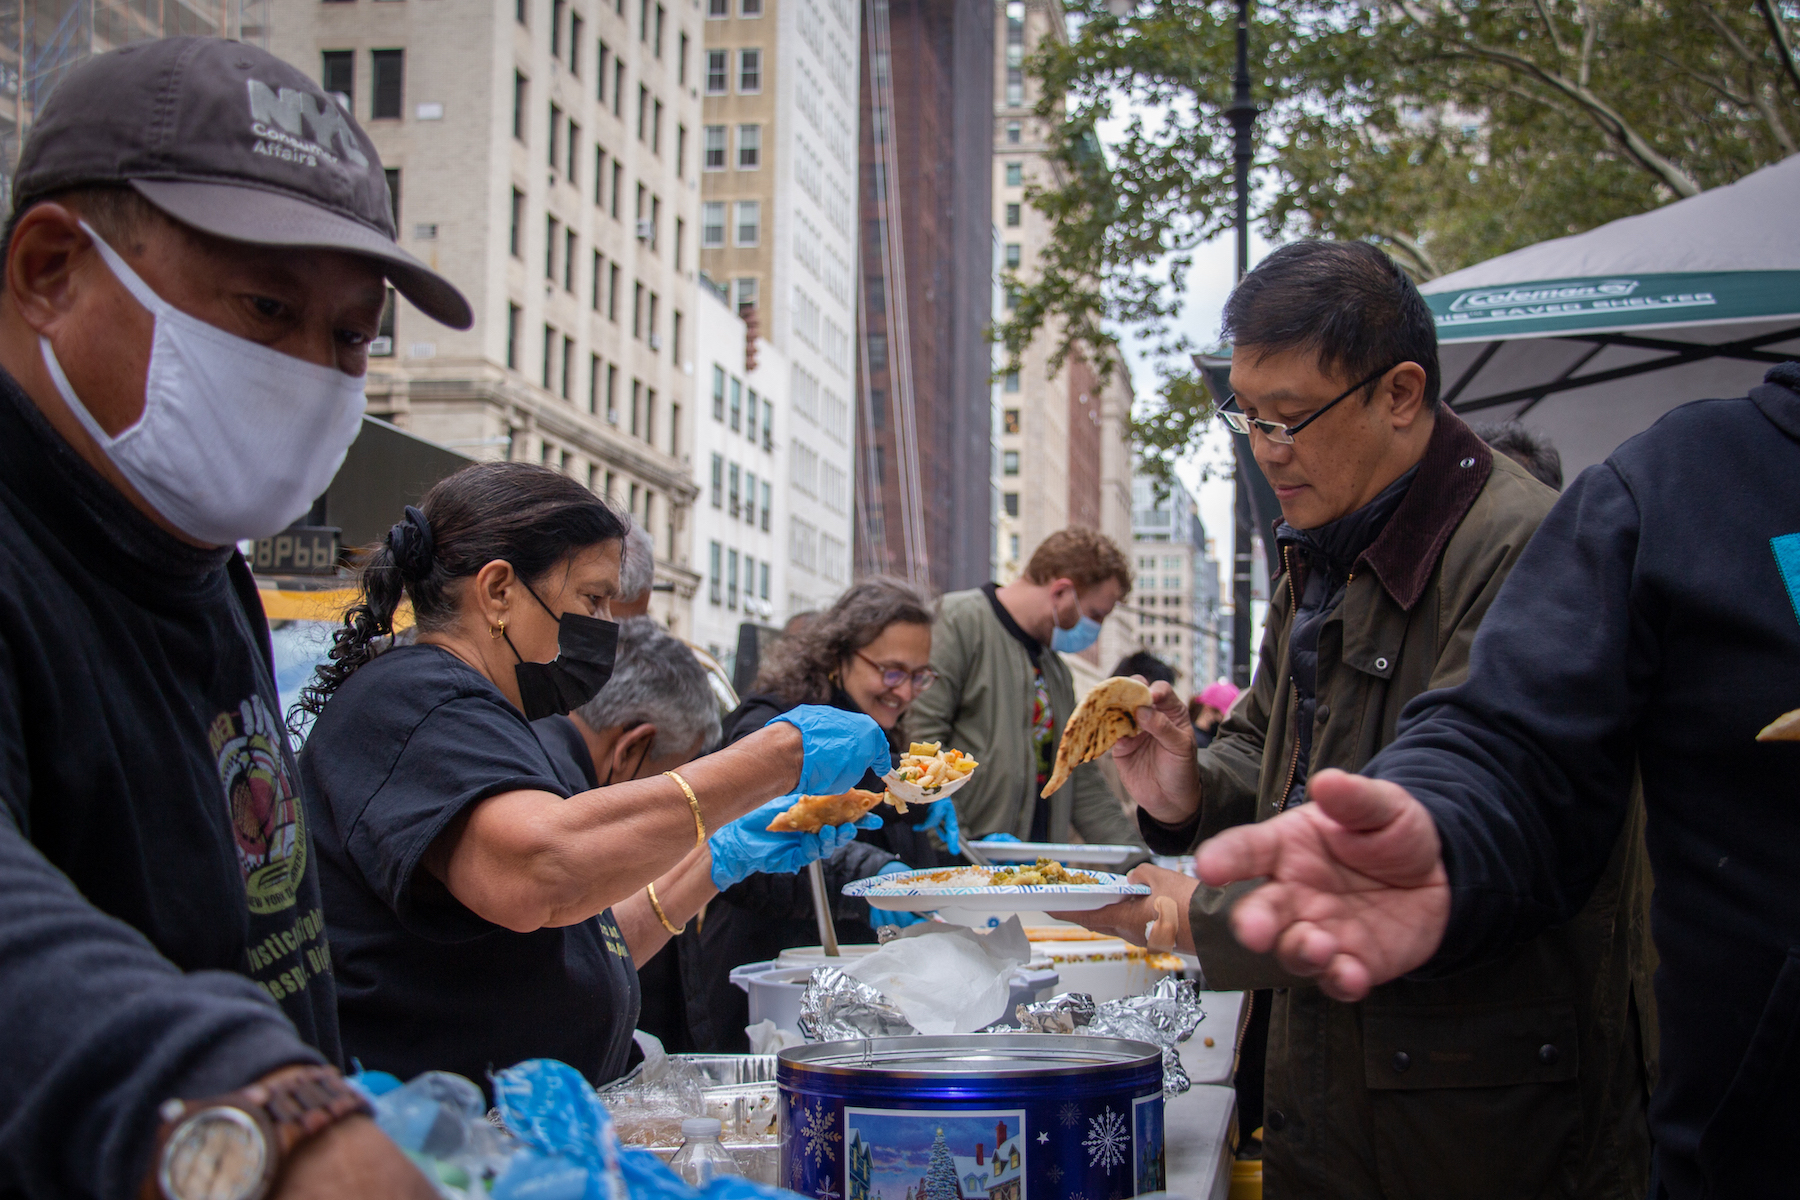 People on one side of a long table set outside on a New York City street dish out food on paper plates to people on the other side.